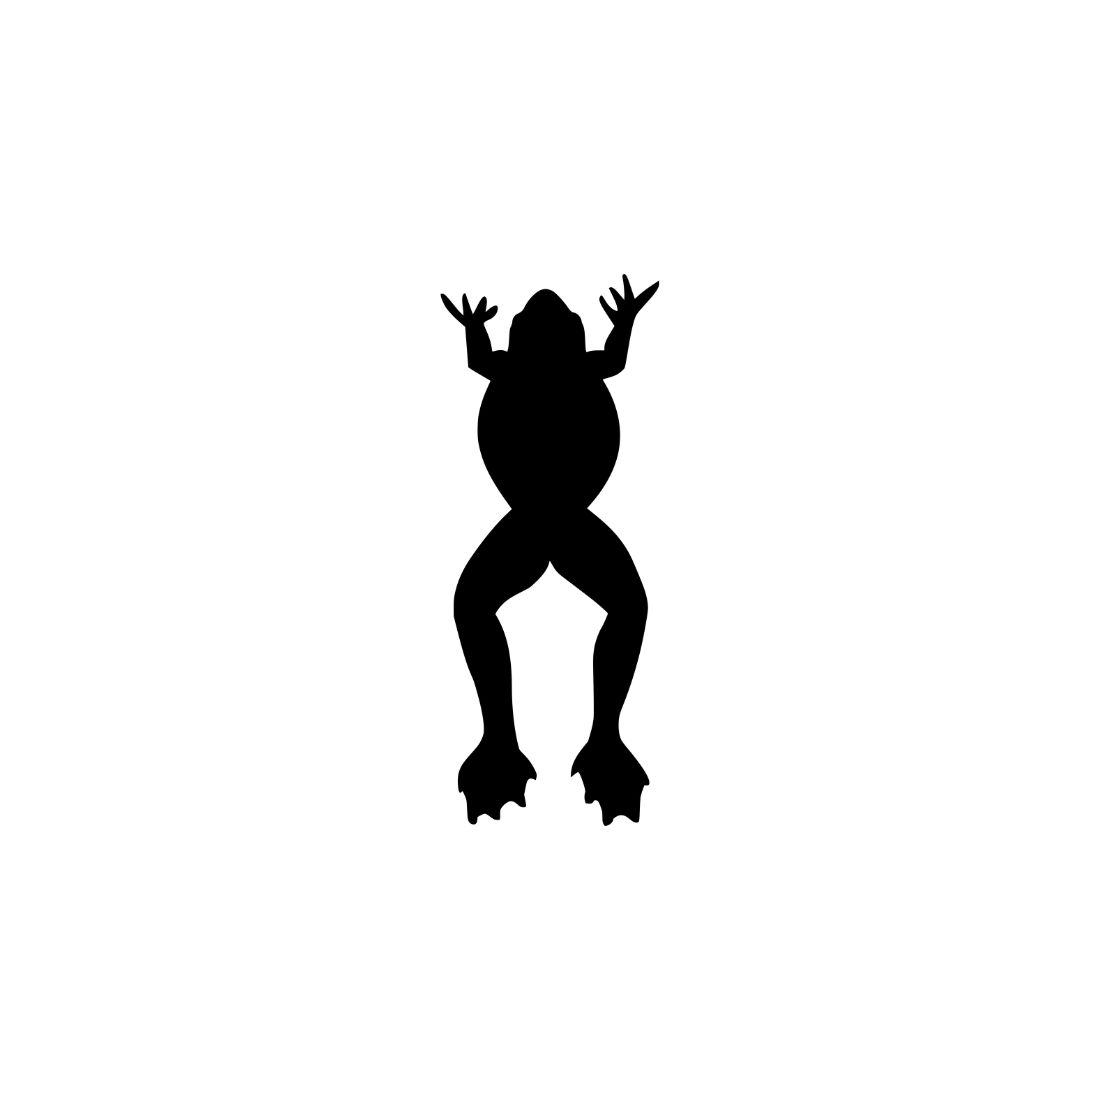 Silhouette of a frog on a white background.